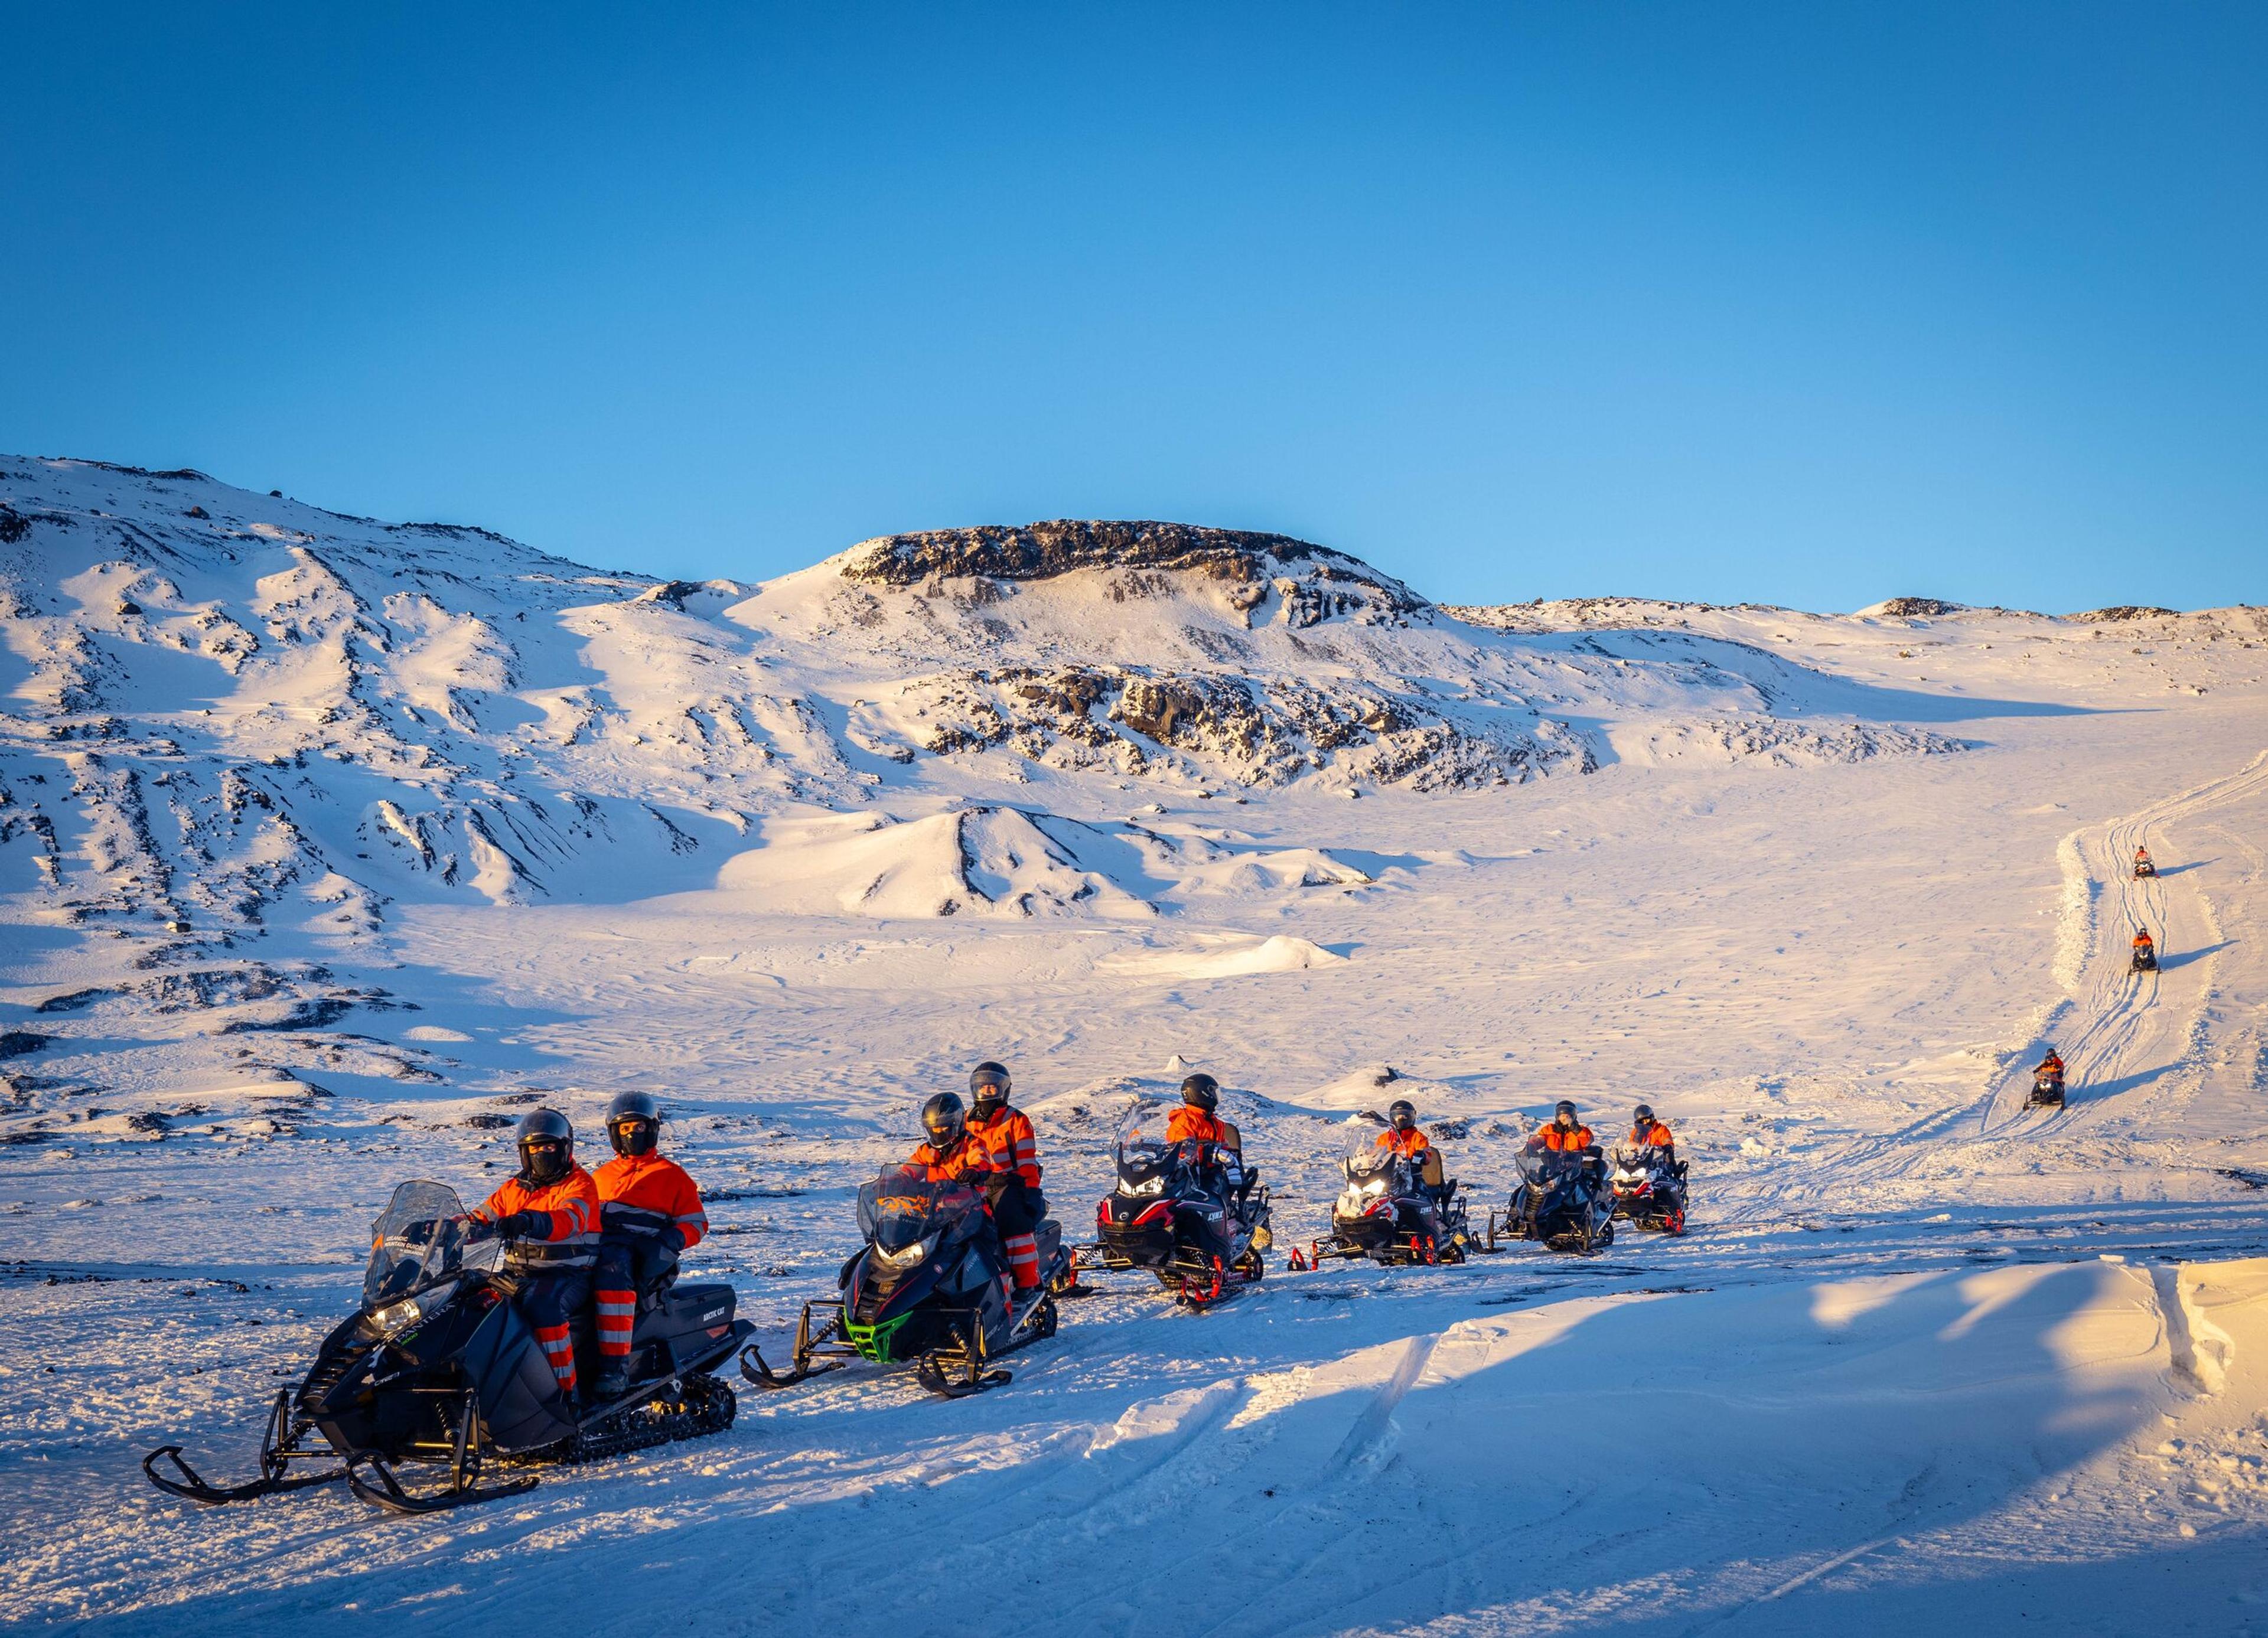 A group of adventurers on snowmobiles enjoy a bright day amidst a snowy landscape with rolling hills and a clear blue sky.